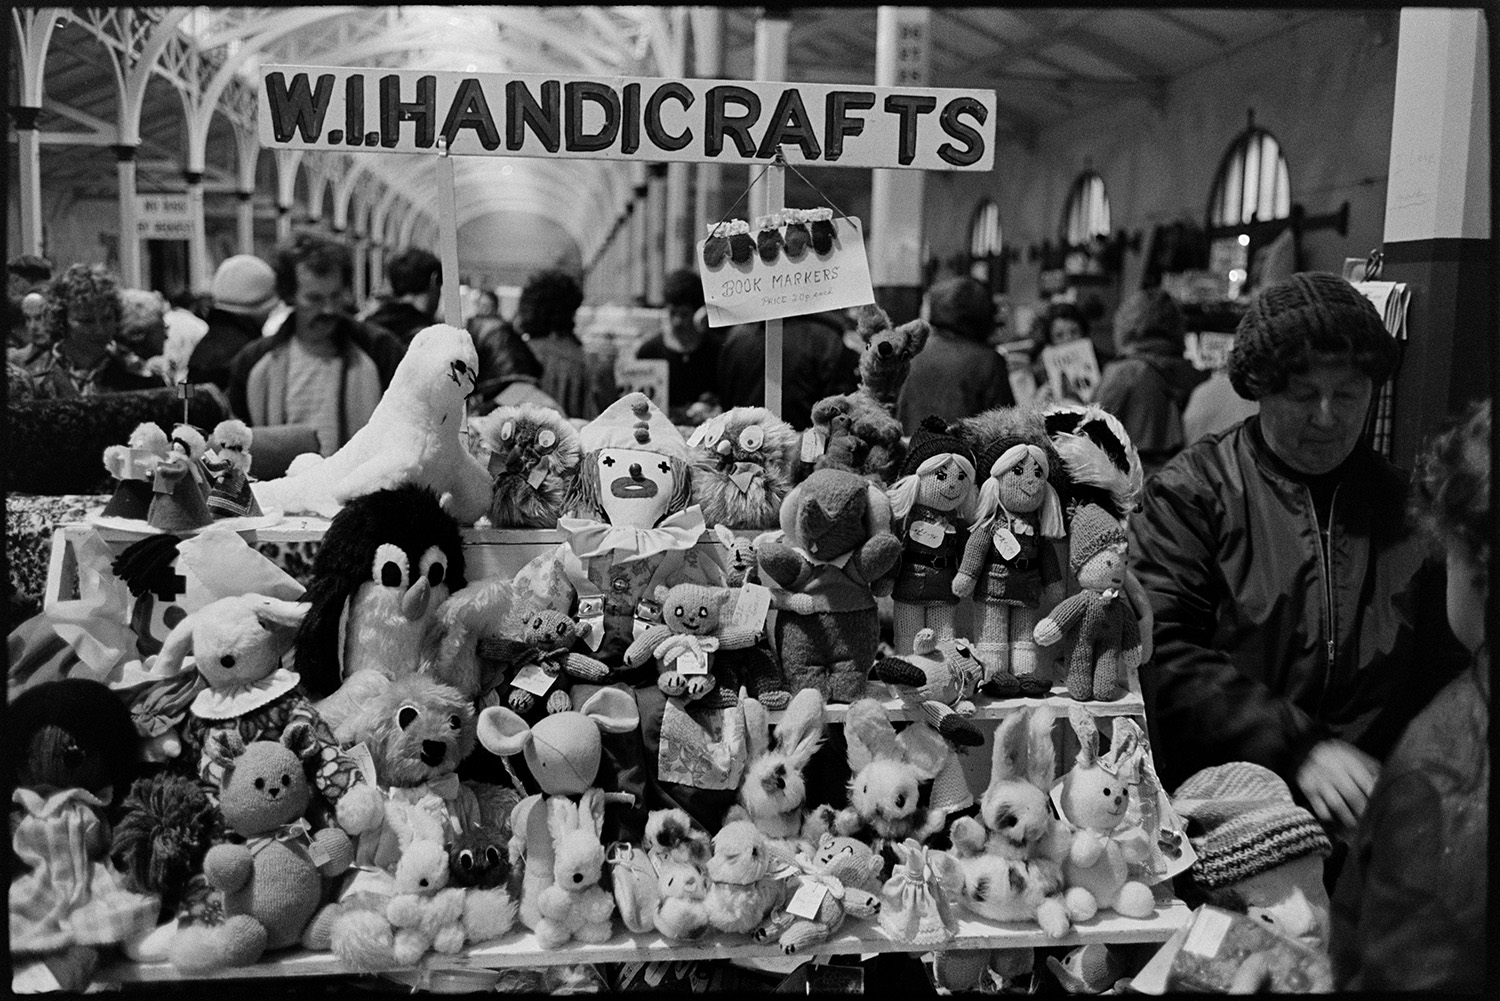 WI Handicrafts stall in pannier market. Stuffed toys.
[Handmade soft toys, including teddy bears, rabbits and dolls, on the Women's Institute Handicrafts stall in Barnstaple Pannier Market.  People shopping and stall holders are visible in the background.]